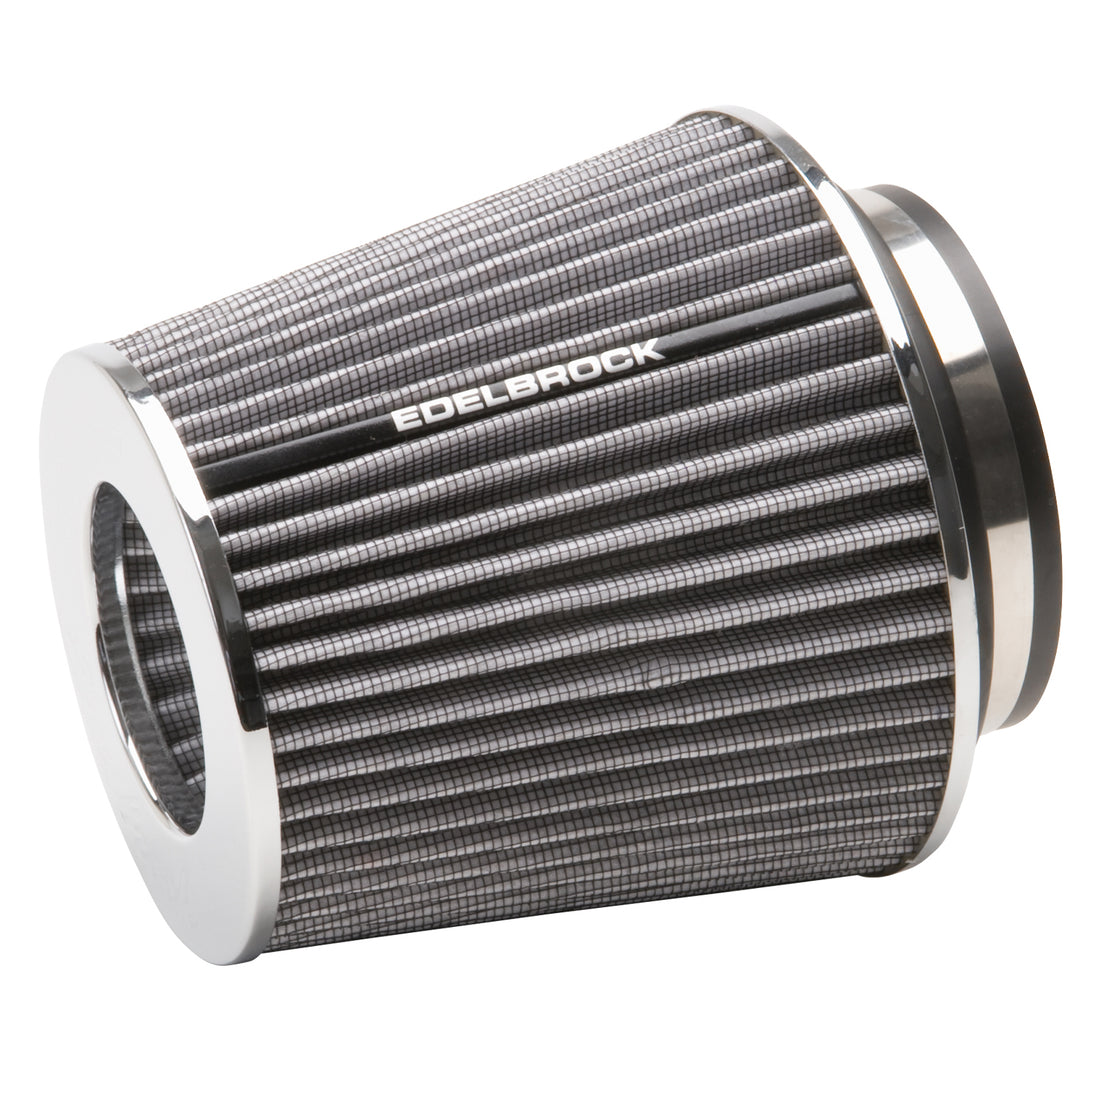 Pro-Flo Universal White Medium Conical Air Filter with 3", 3.5", and 4" Inlet Edelbrock